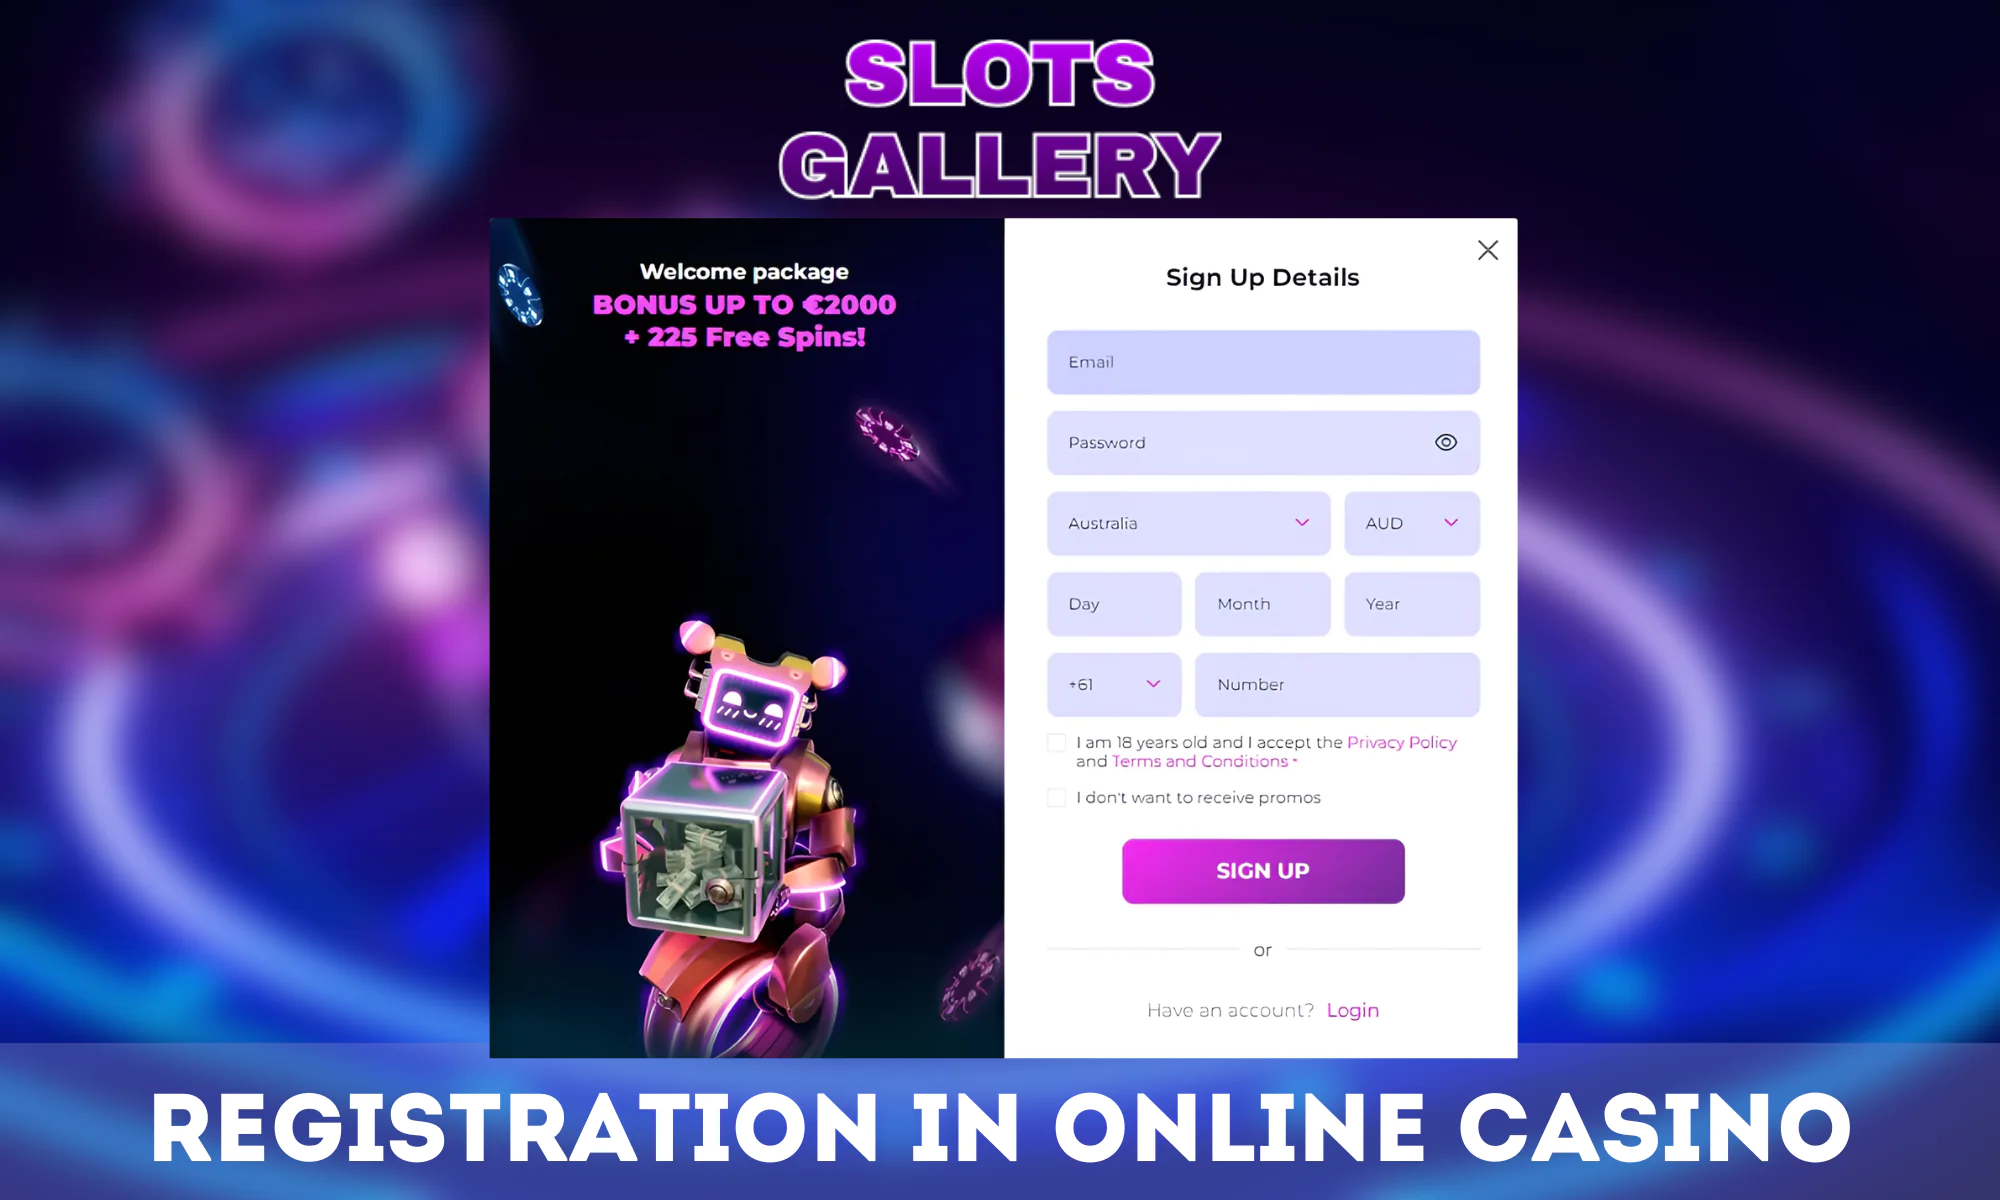 Step-by-step instructions on how to register at Slots Gallery Casino